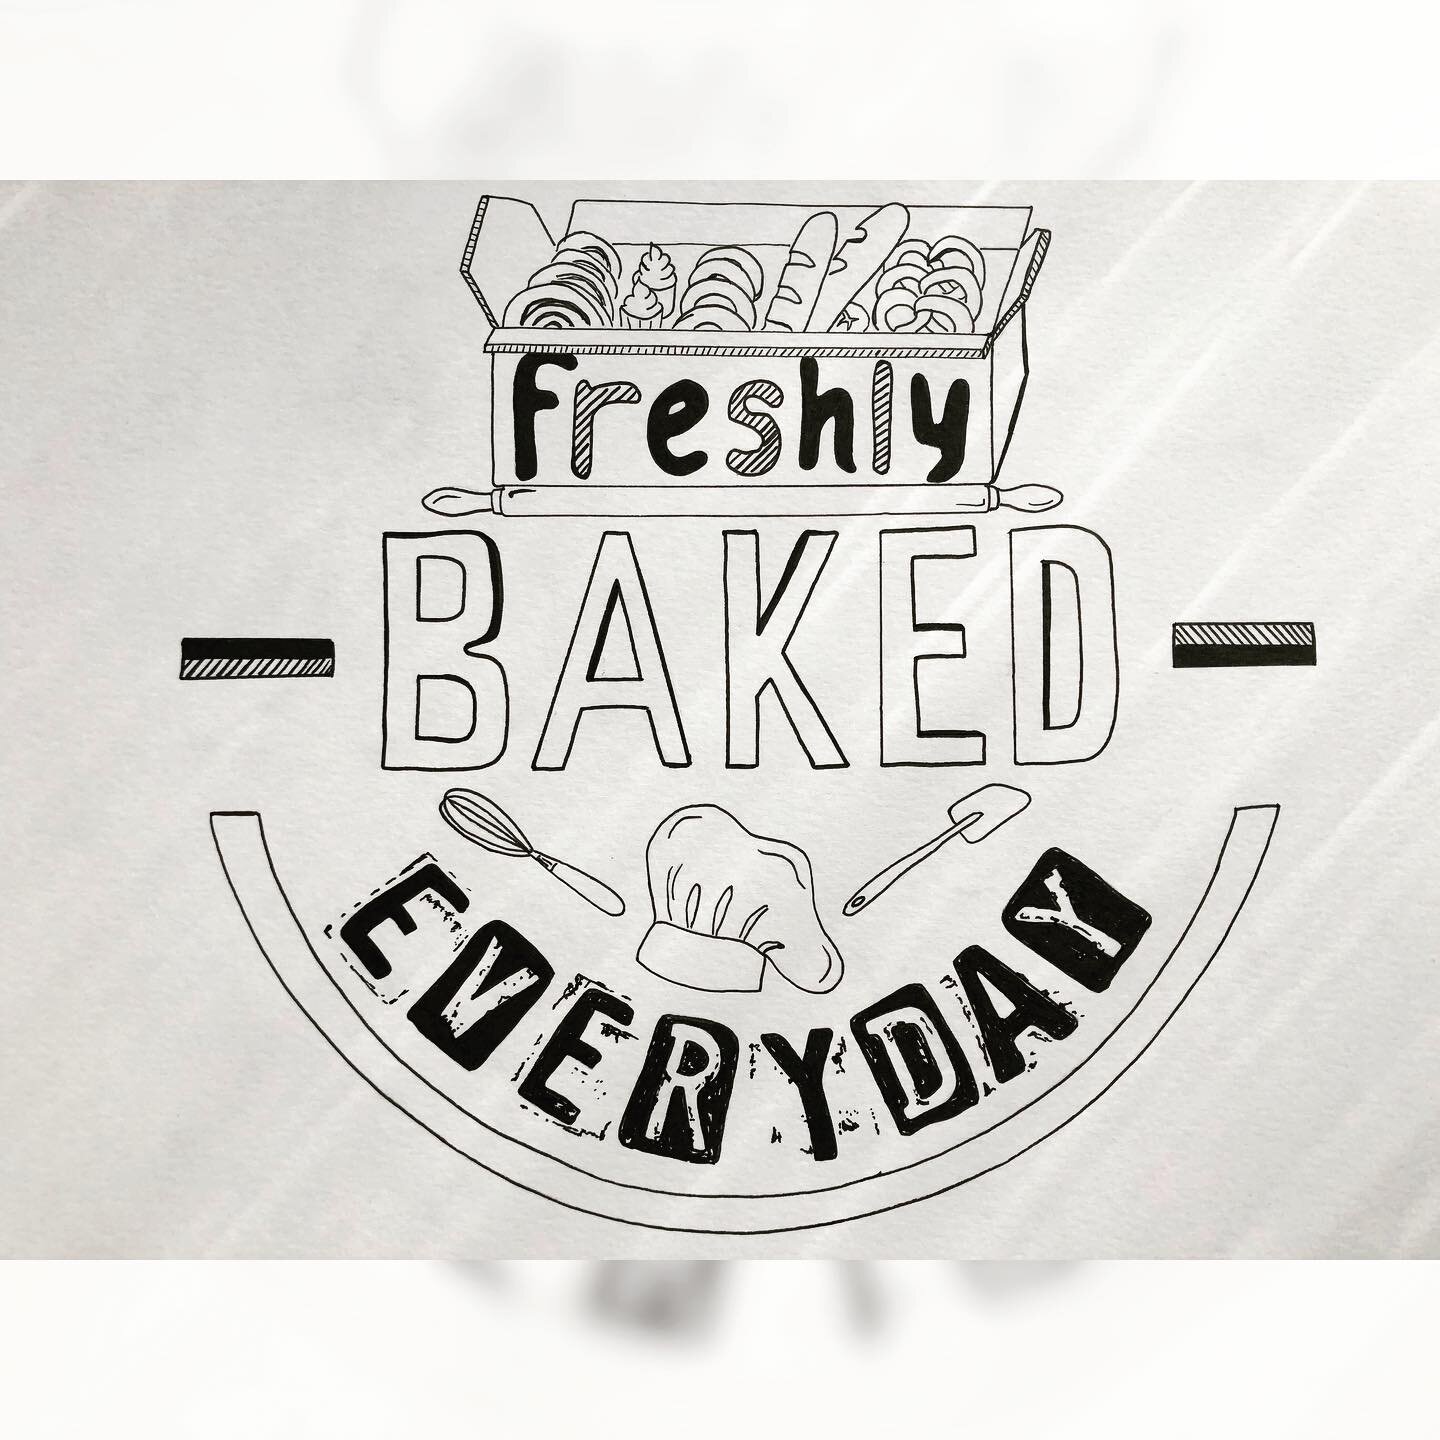 Bakery Mural Design #3
Verdict is I liked the old school stamp style on this one but think I need to make the &ldquo;freshly&rdquo; a little more vintage in style to match the rest of the design&hellip;
.
.
.
.
#wallmural #muralart #graphicdesign #le